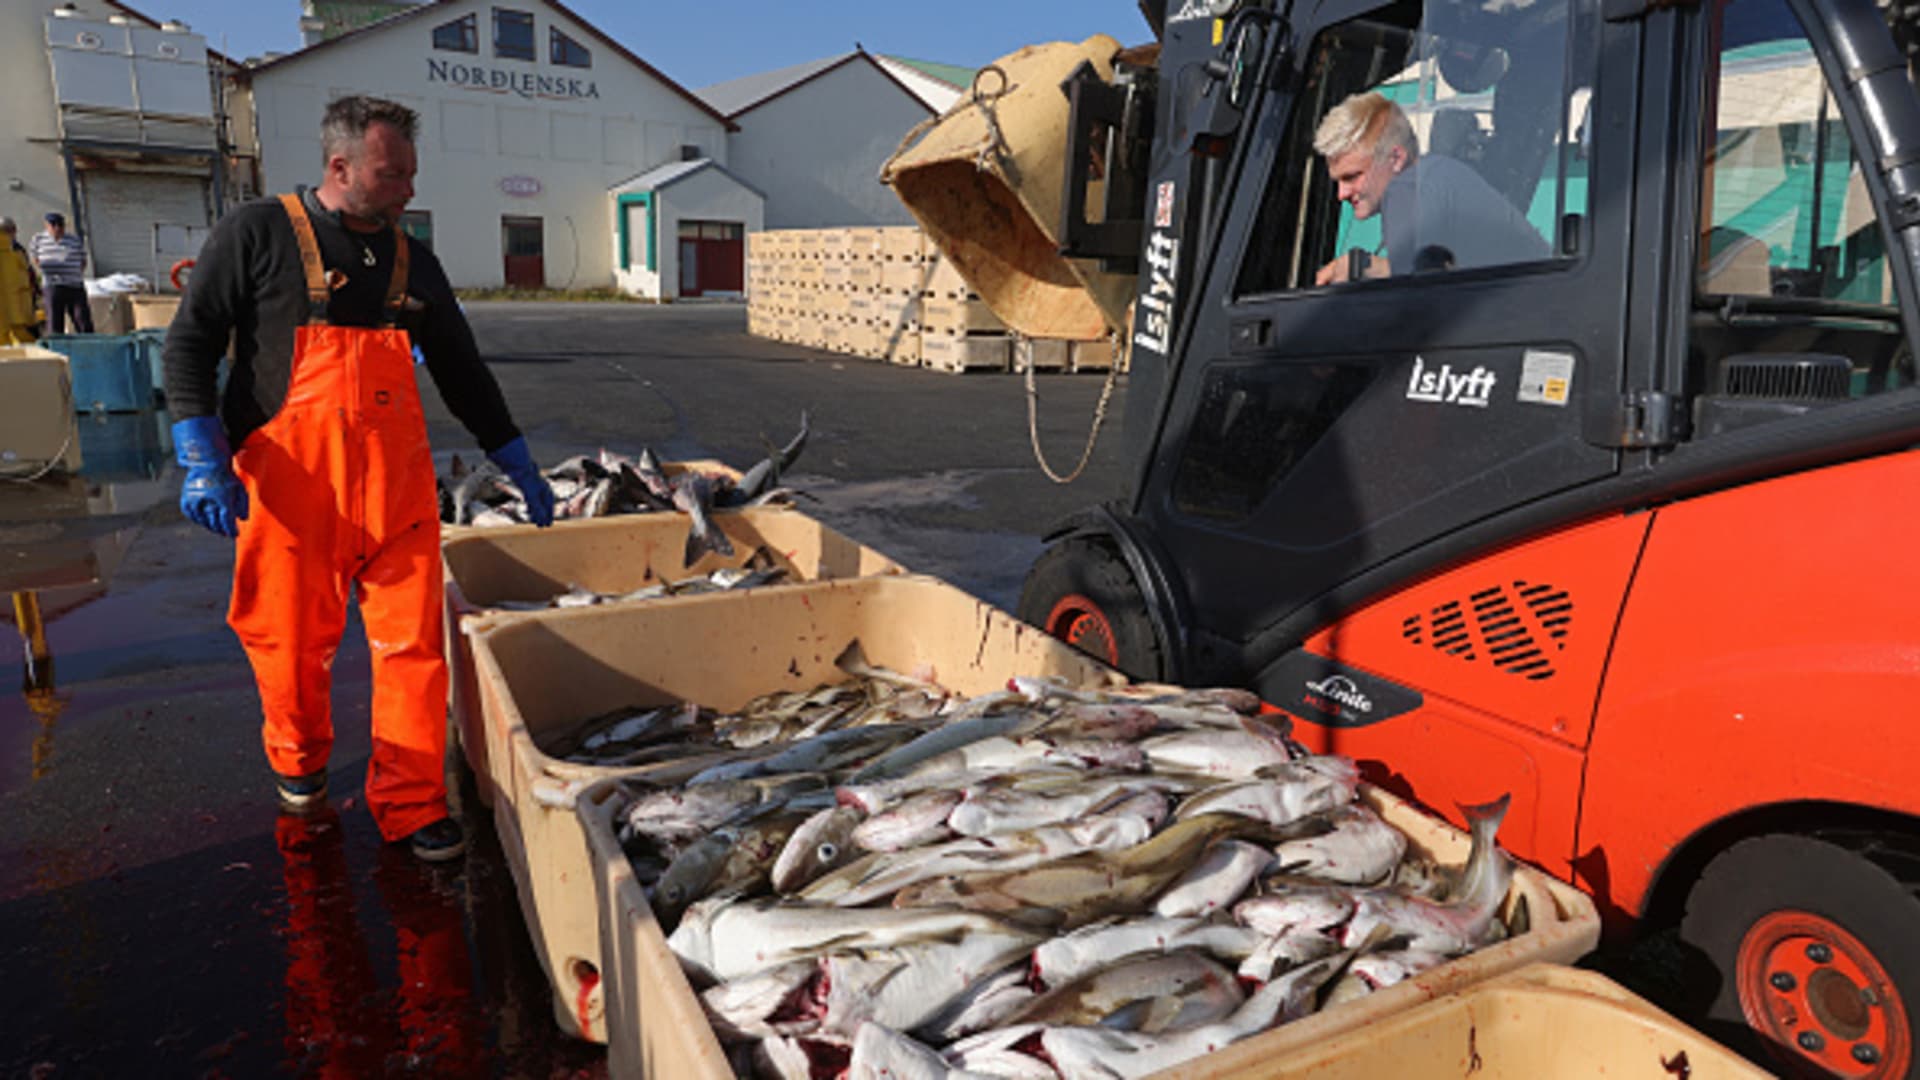 Fisherman Vigfus Asbjornsson (L) sorts his catch of cod and pollack on August 16, 2021 in Hofn, Hornafjordur, Iceland. Global warming is contributing to a rise in temperatures in the waters around Iceland, which is effecting the fishing industry. Changing temperatures have a strong influence on where species of fish find habitat, leading to shifts in the fishing catch. One local fisherman also said the spawning grounds of the fish he catches are moving farther north year by year. Iceland is undergoing a strong impact from climates change, including accelerated melting of the island's many glaciers but also new opportunities for agriculture.